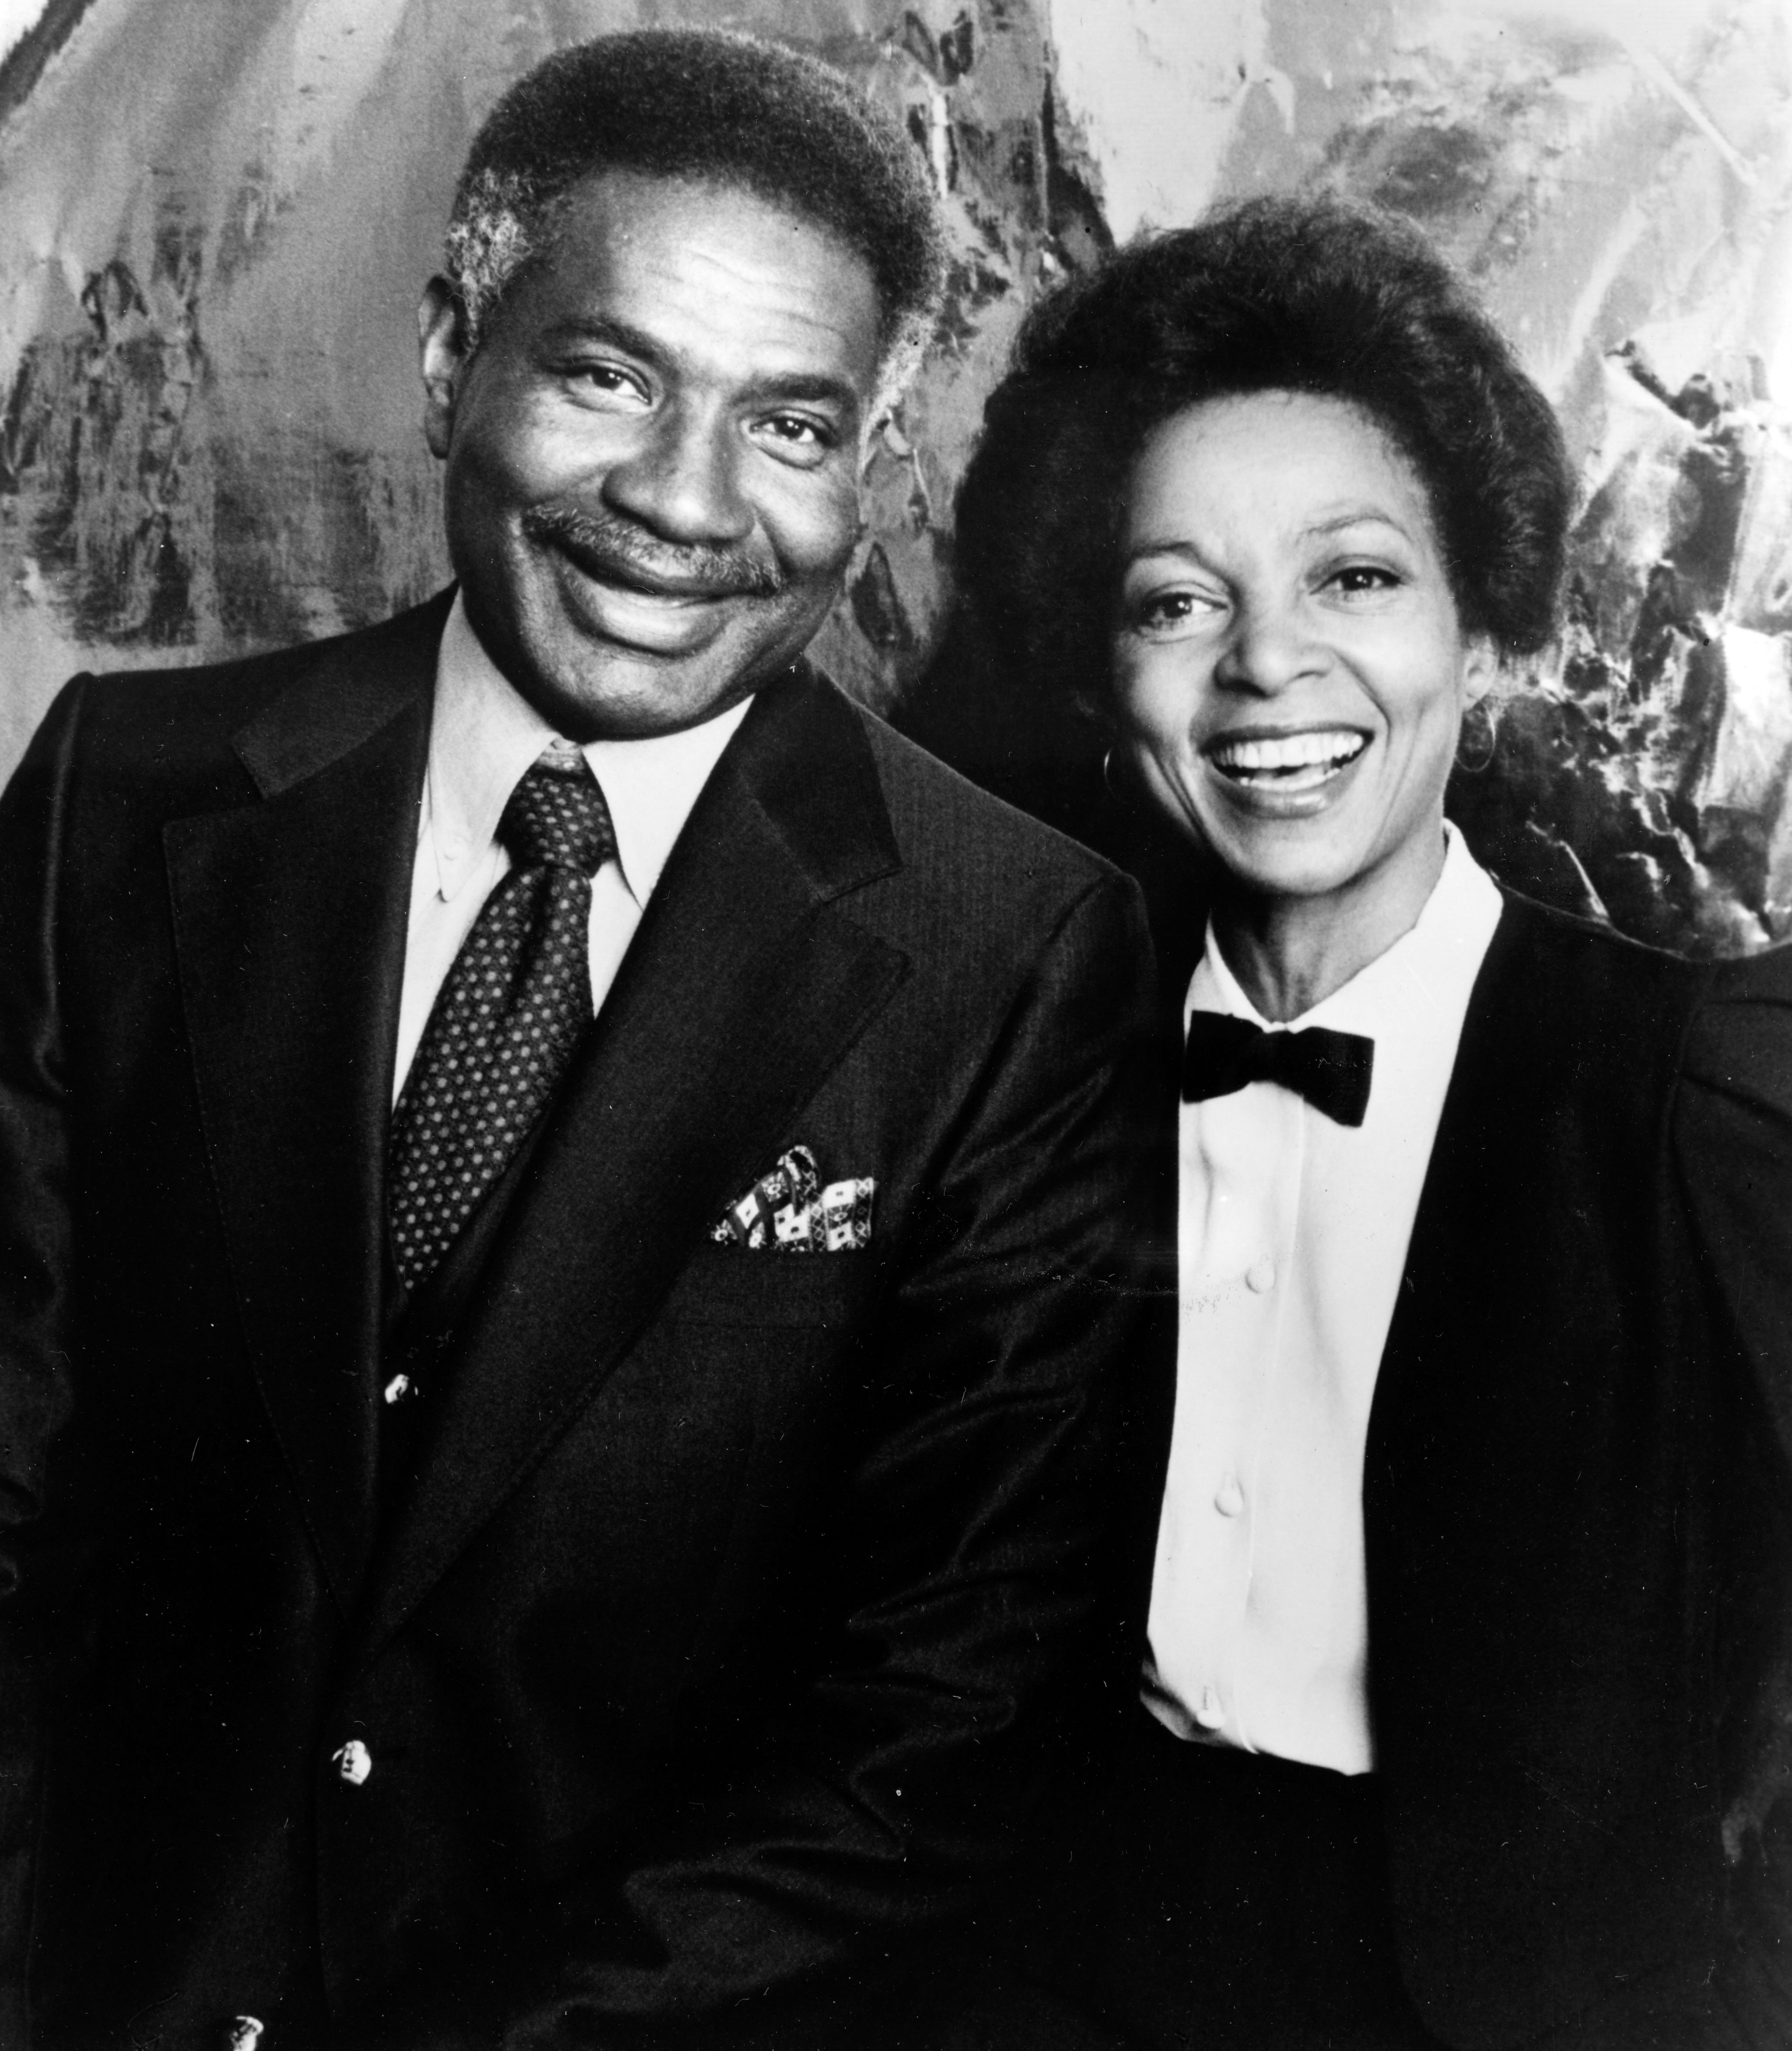 A monochrome portrait of Ossie Davis and Ruby Dee on January 01, 1980 | Photo: Getty Images